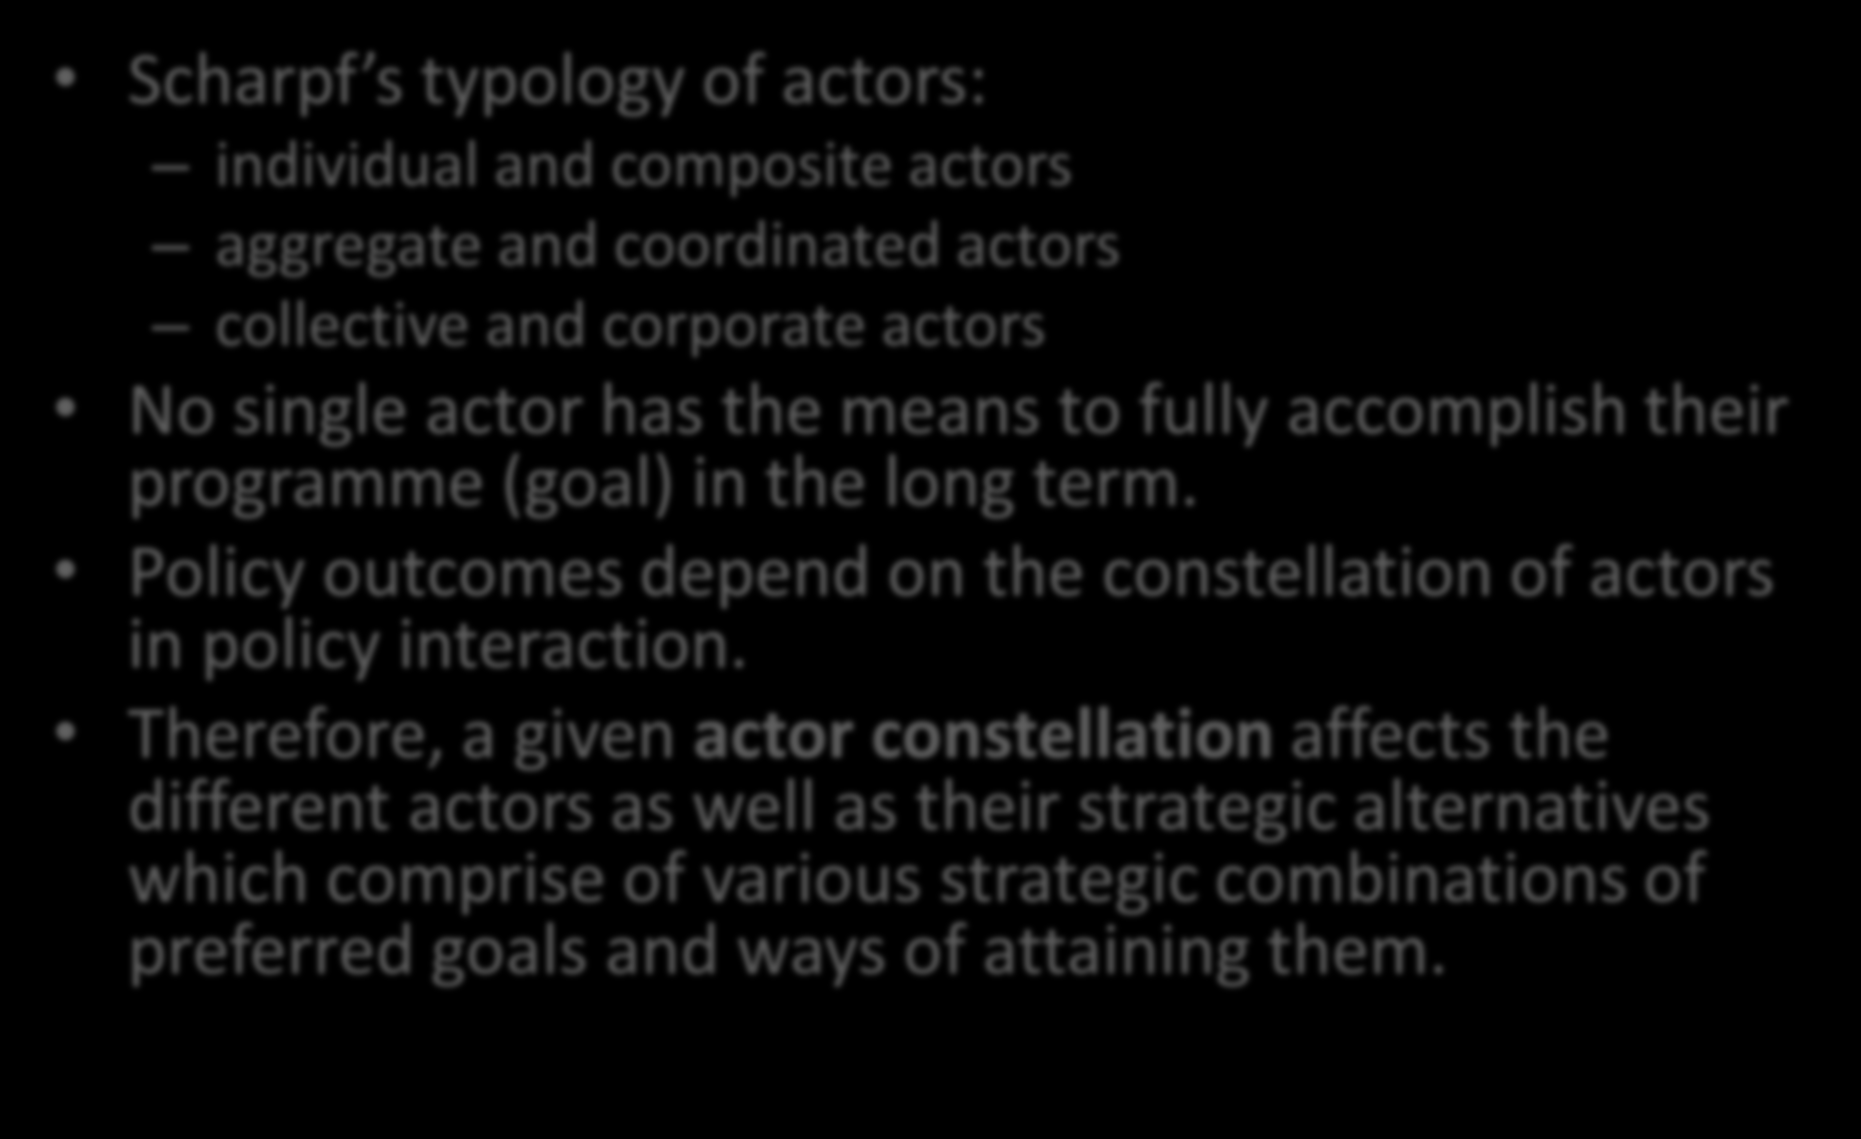 Actor types and constellations Scharpf s typology of actors: individual and composite actors aggregate and coordinated actors collective and corporate actors No single actor has the means to fully